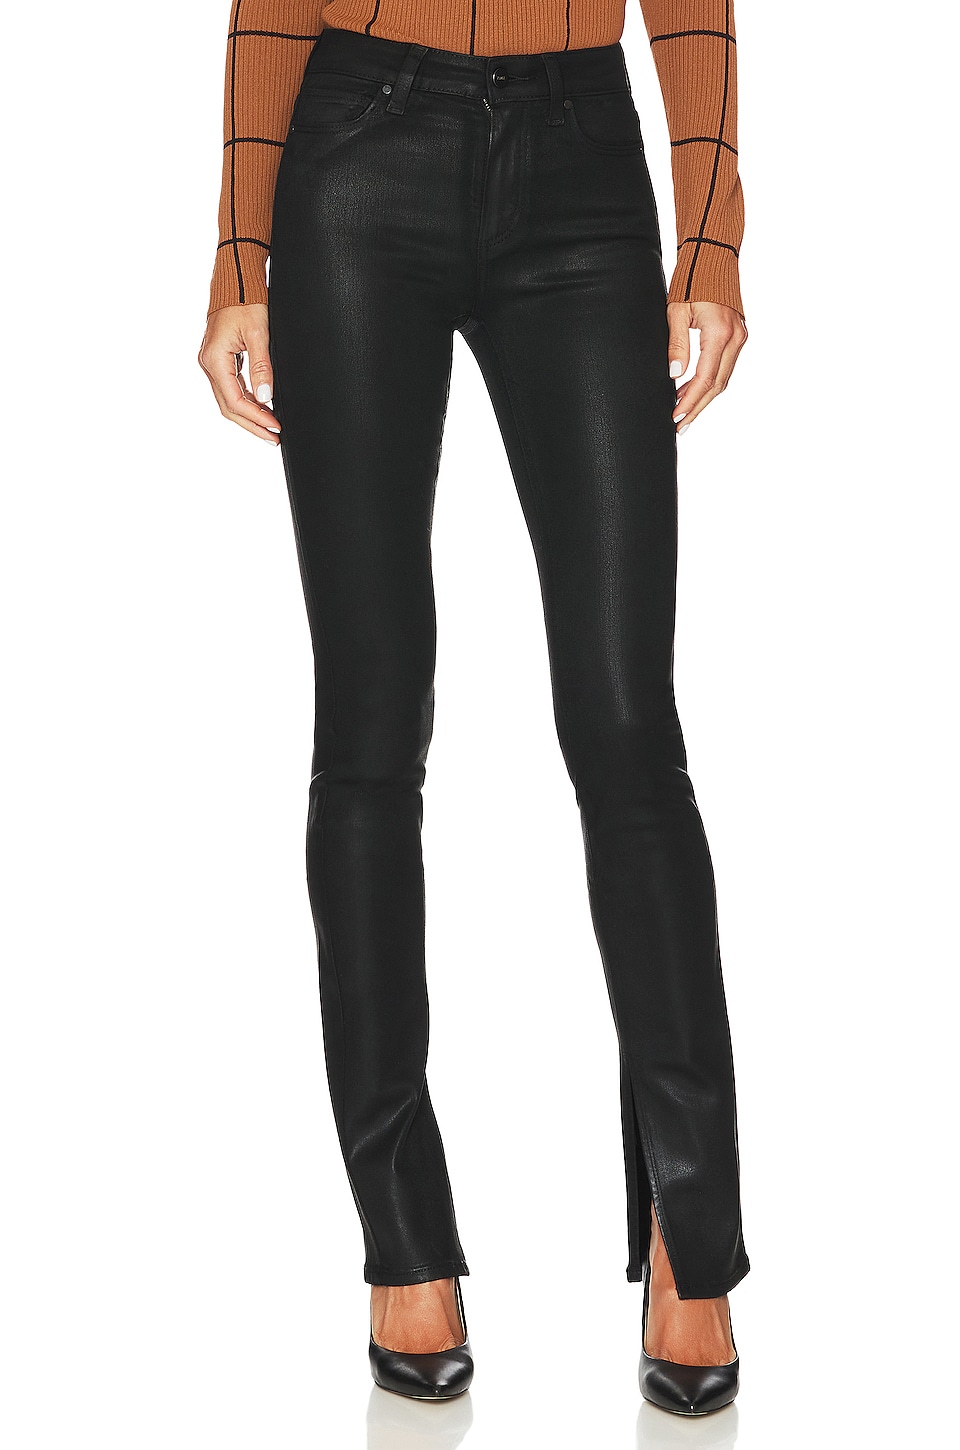 PAIGE Constance Skinny in Black Fog Luxe Coating | REVOLVE